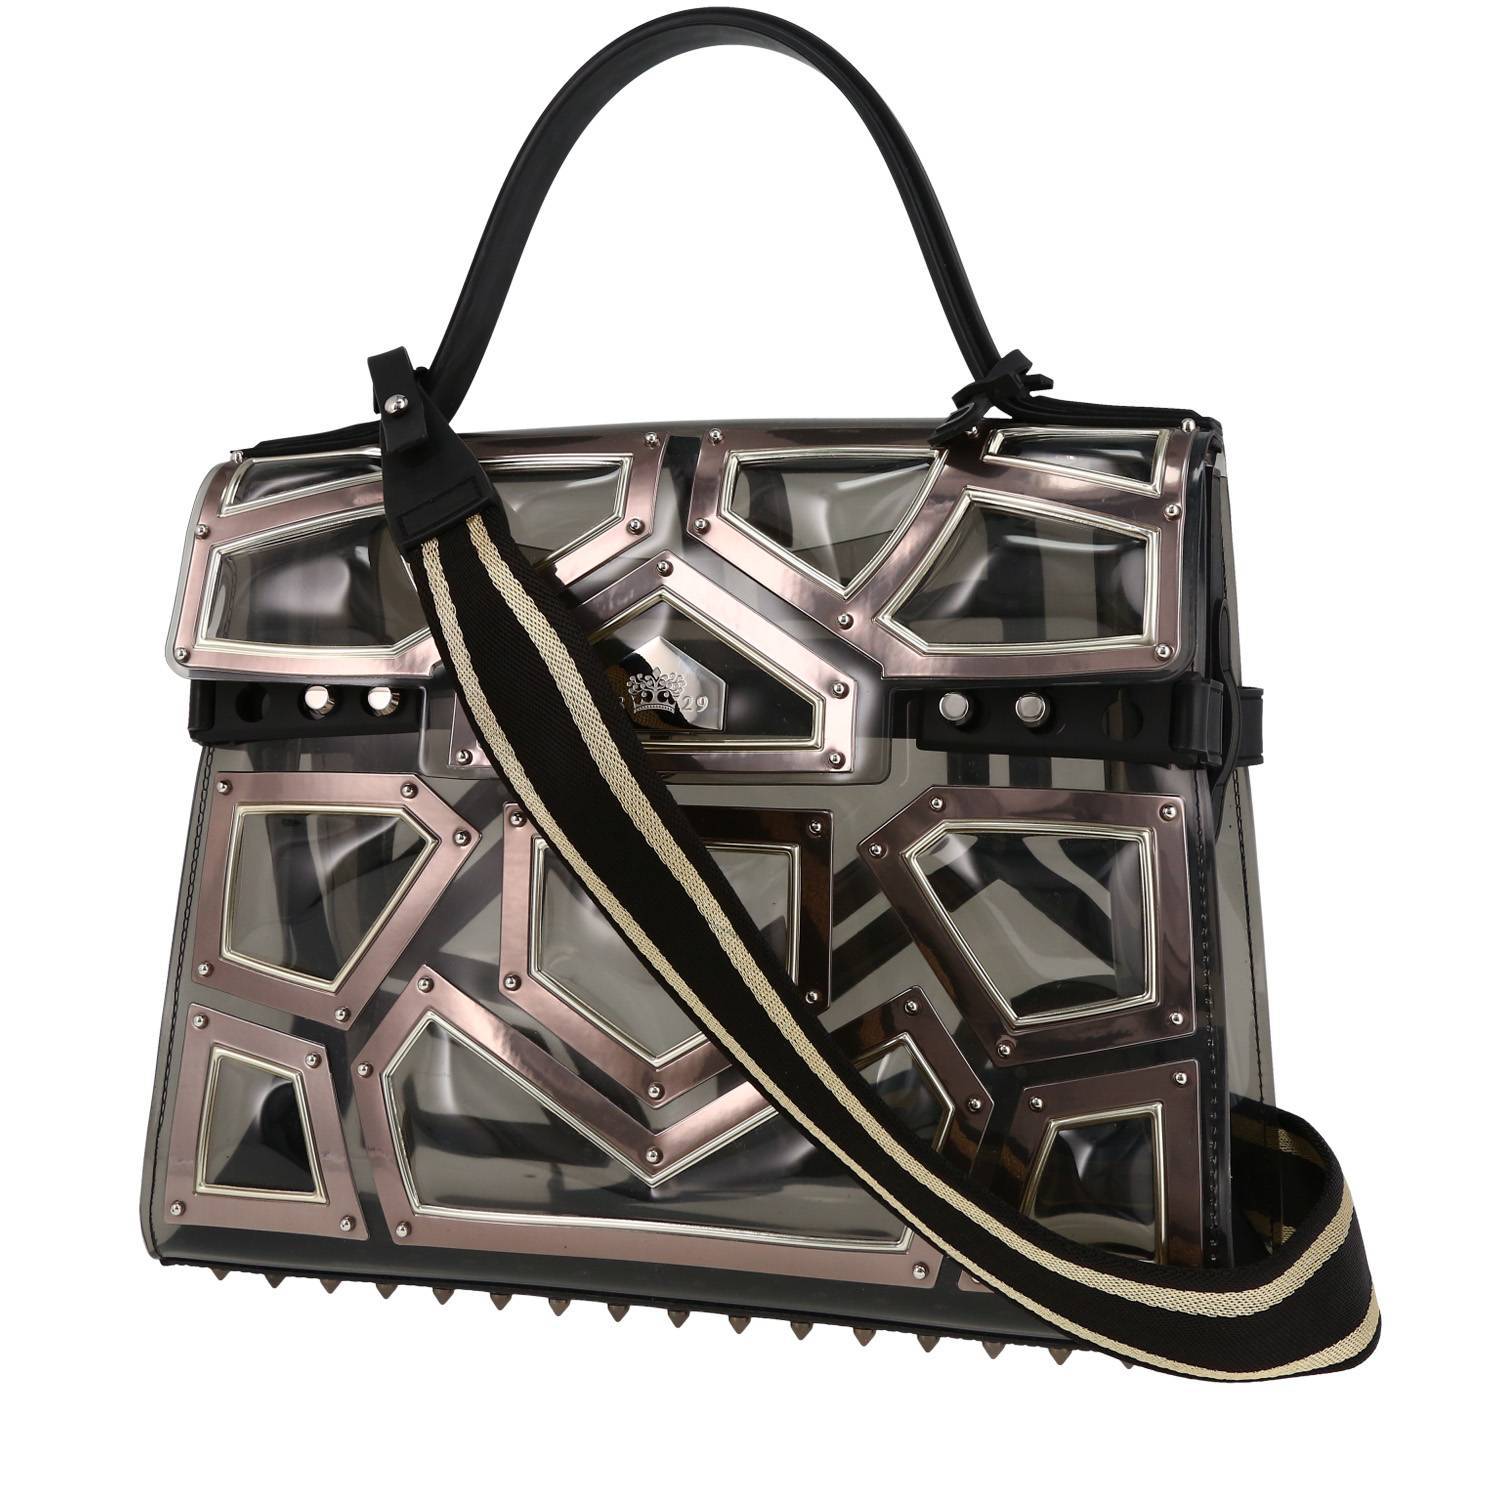 Delvaux's WondeRings Collection Is An Easy Way To Give Its Classic Bags An  Instant Update